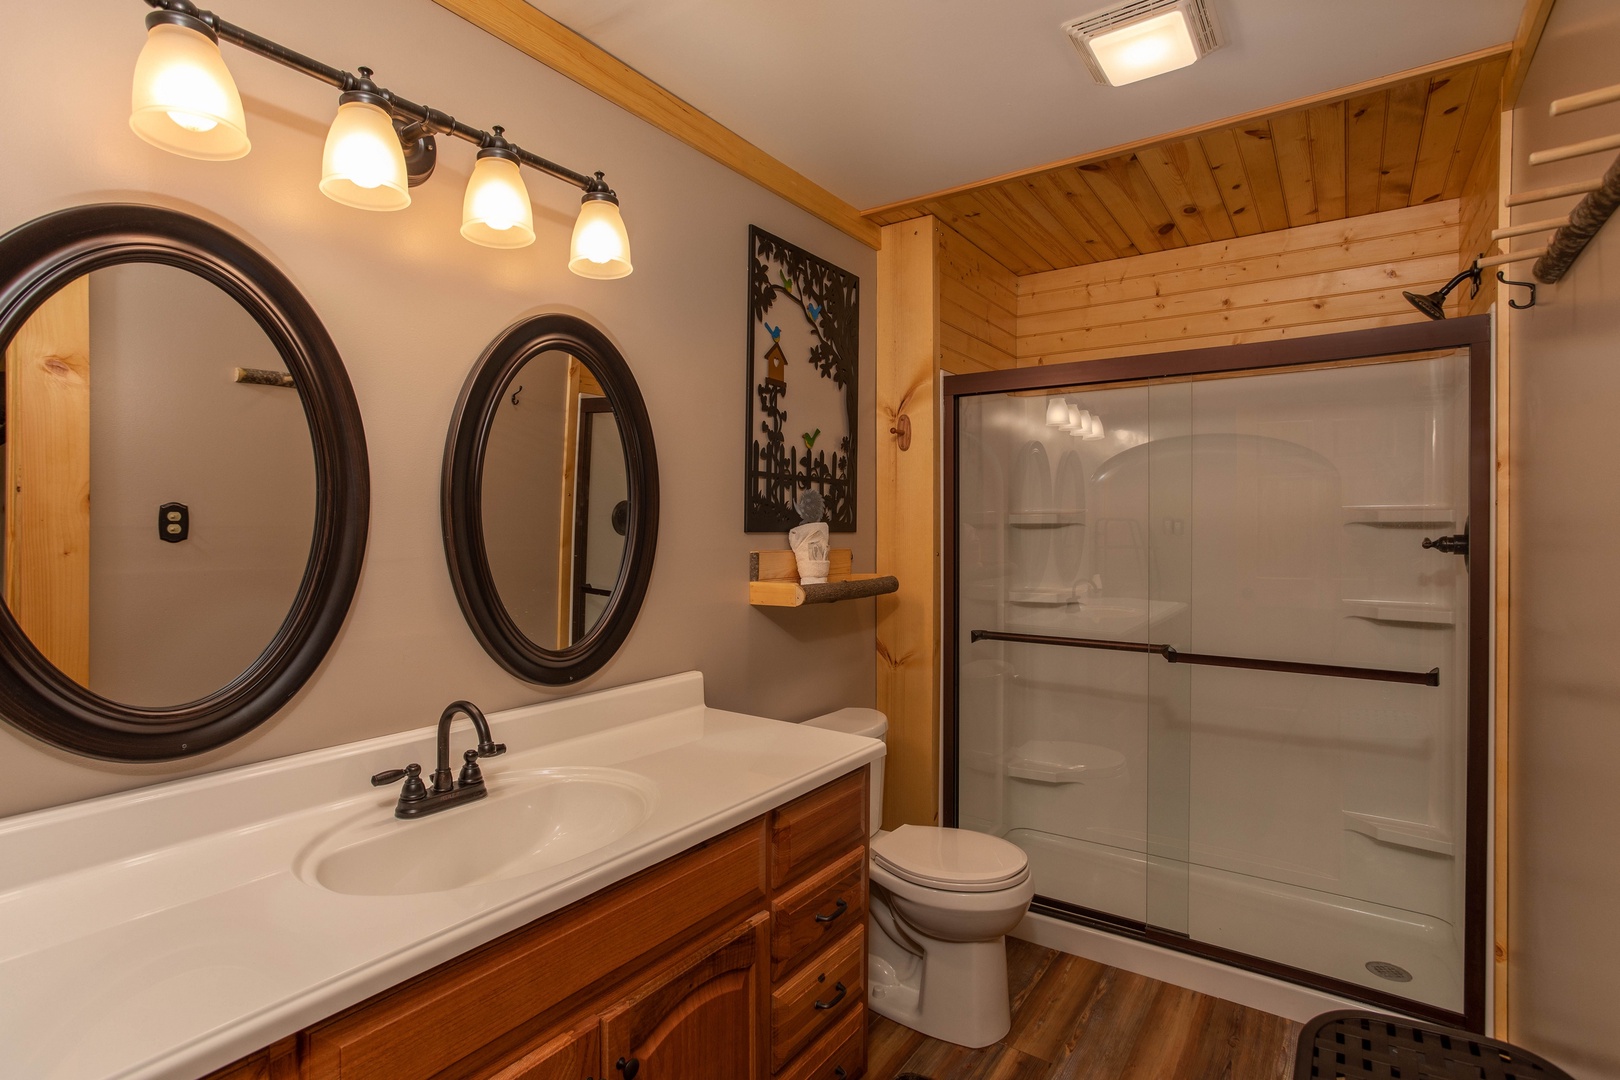 Bathroom with a large shower at I Do Love Views, a 3 bedroom cabin rental located in Pigeon Forge